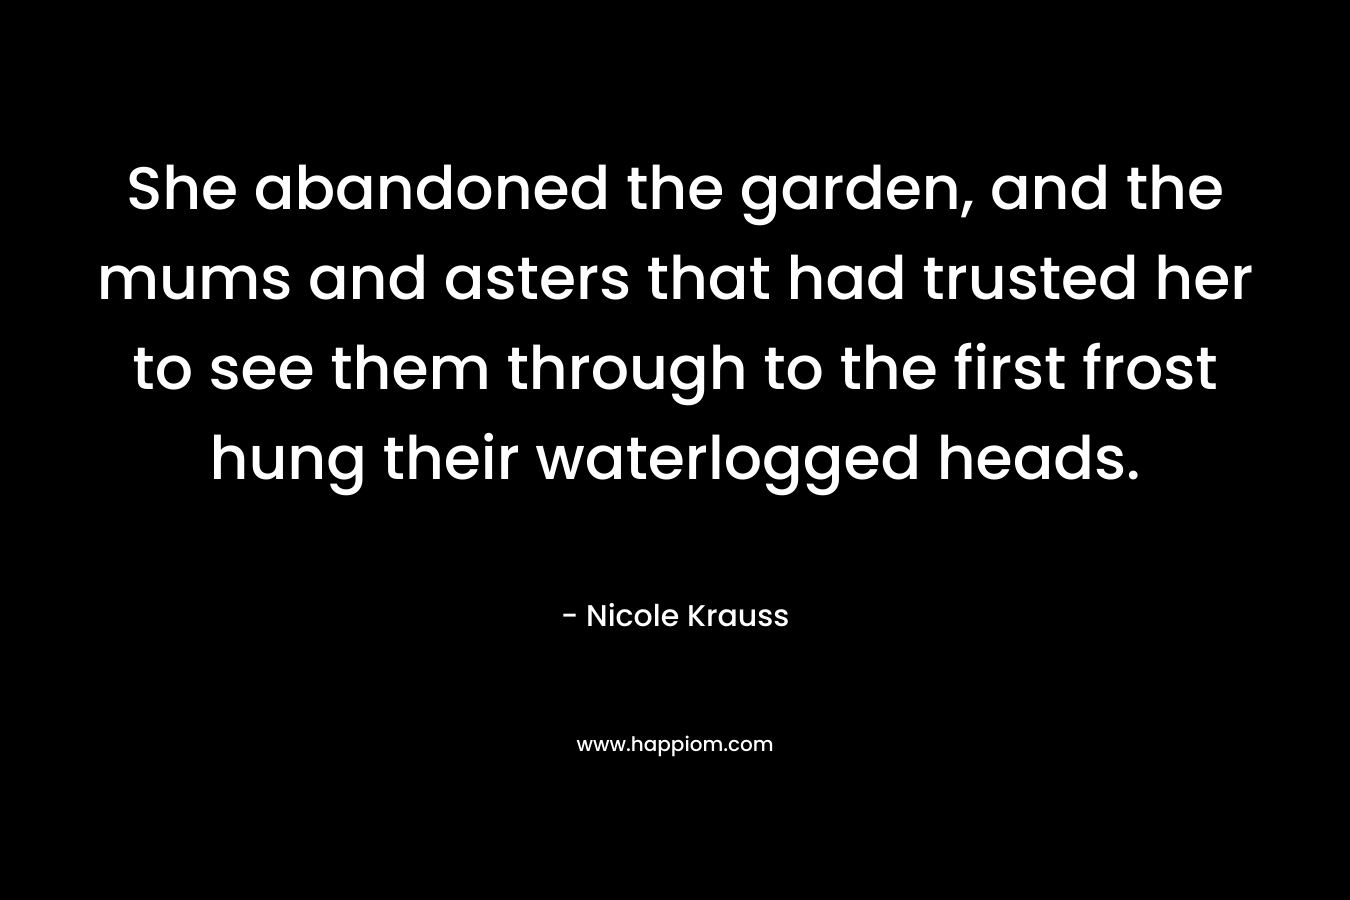 She abandoned the garden, and the mums and asters that had trusted her to see them through to the first frost hung their waterlogged heads. – Nicole Krauss